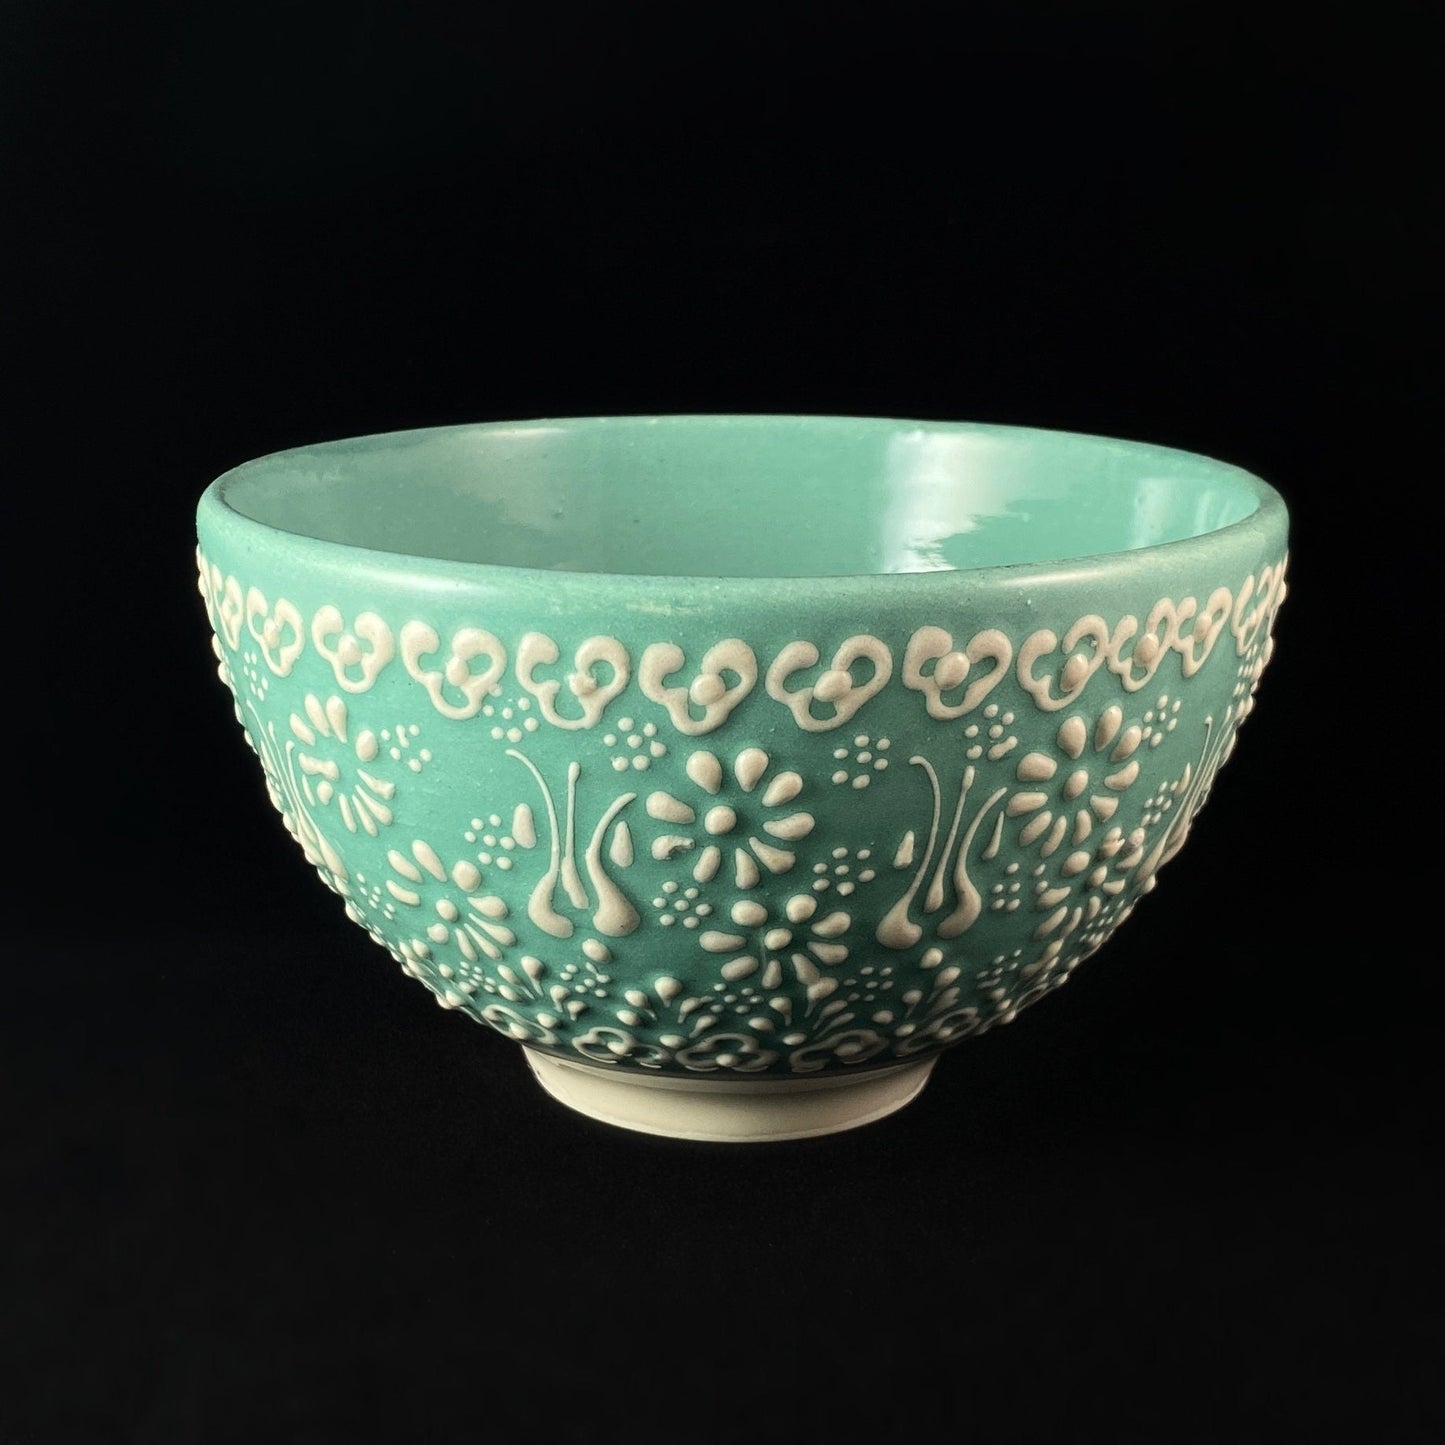 Handmade Footed Bowl, Functional and Decorative Turkish Pottery, Cottagecore Style, Mint